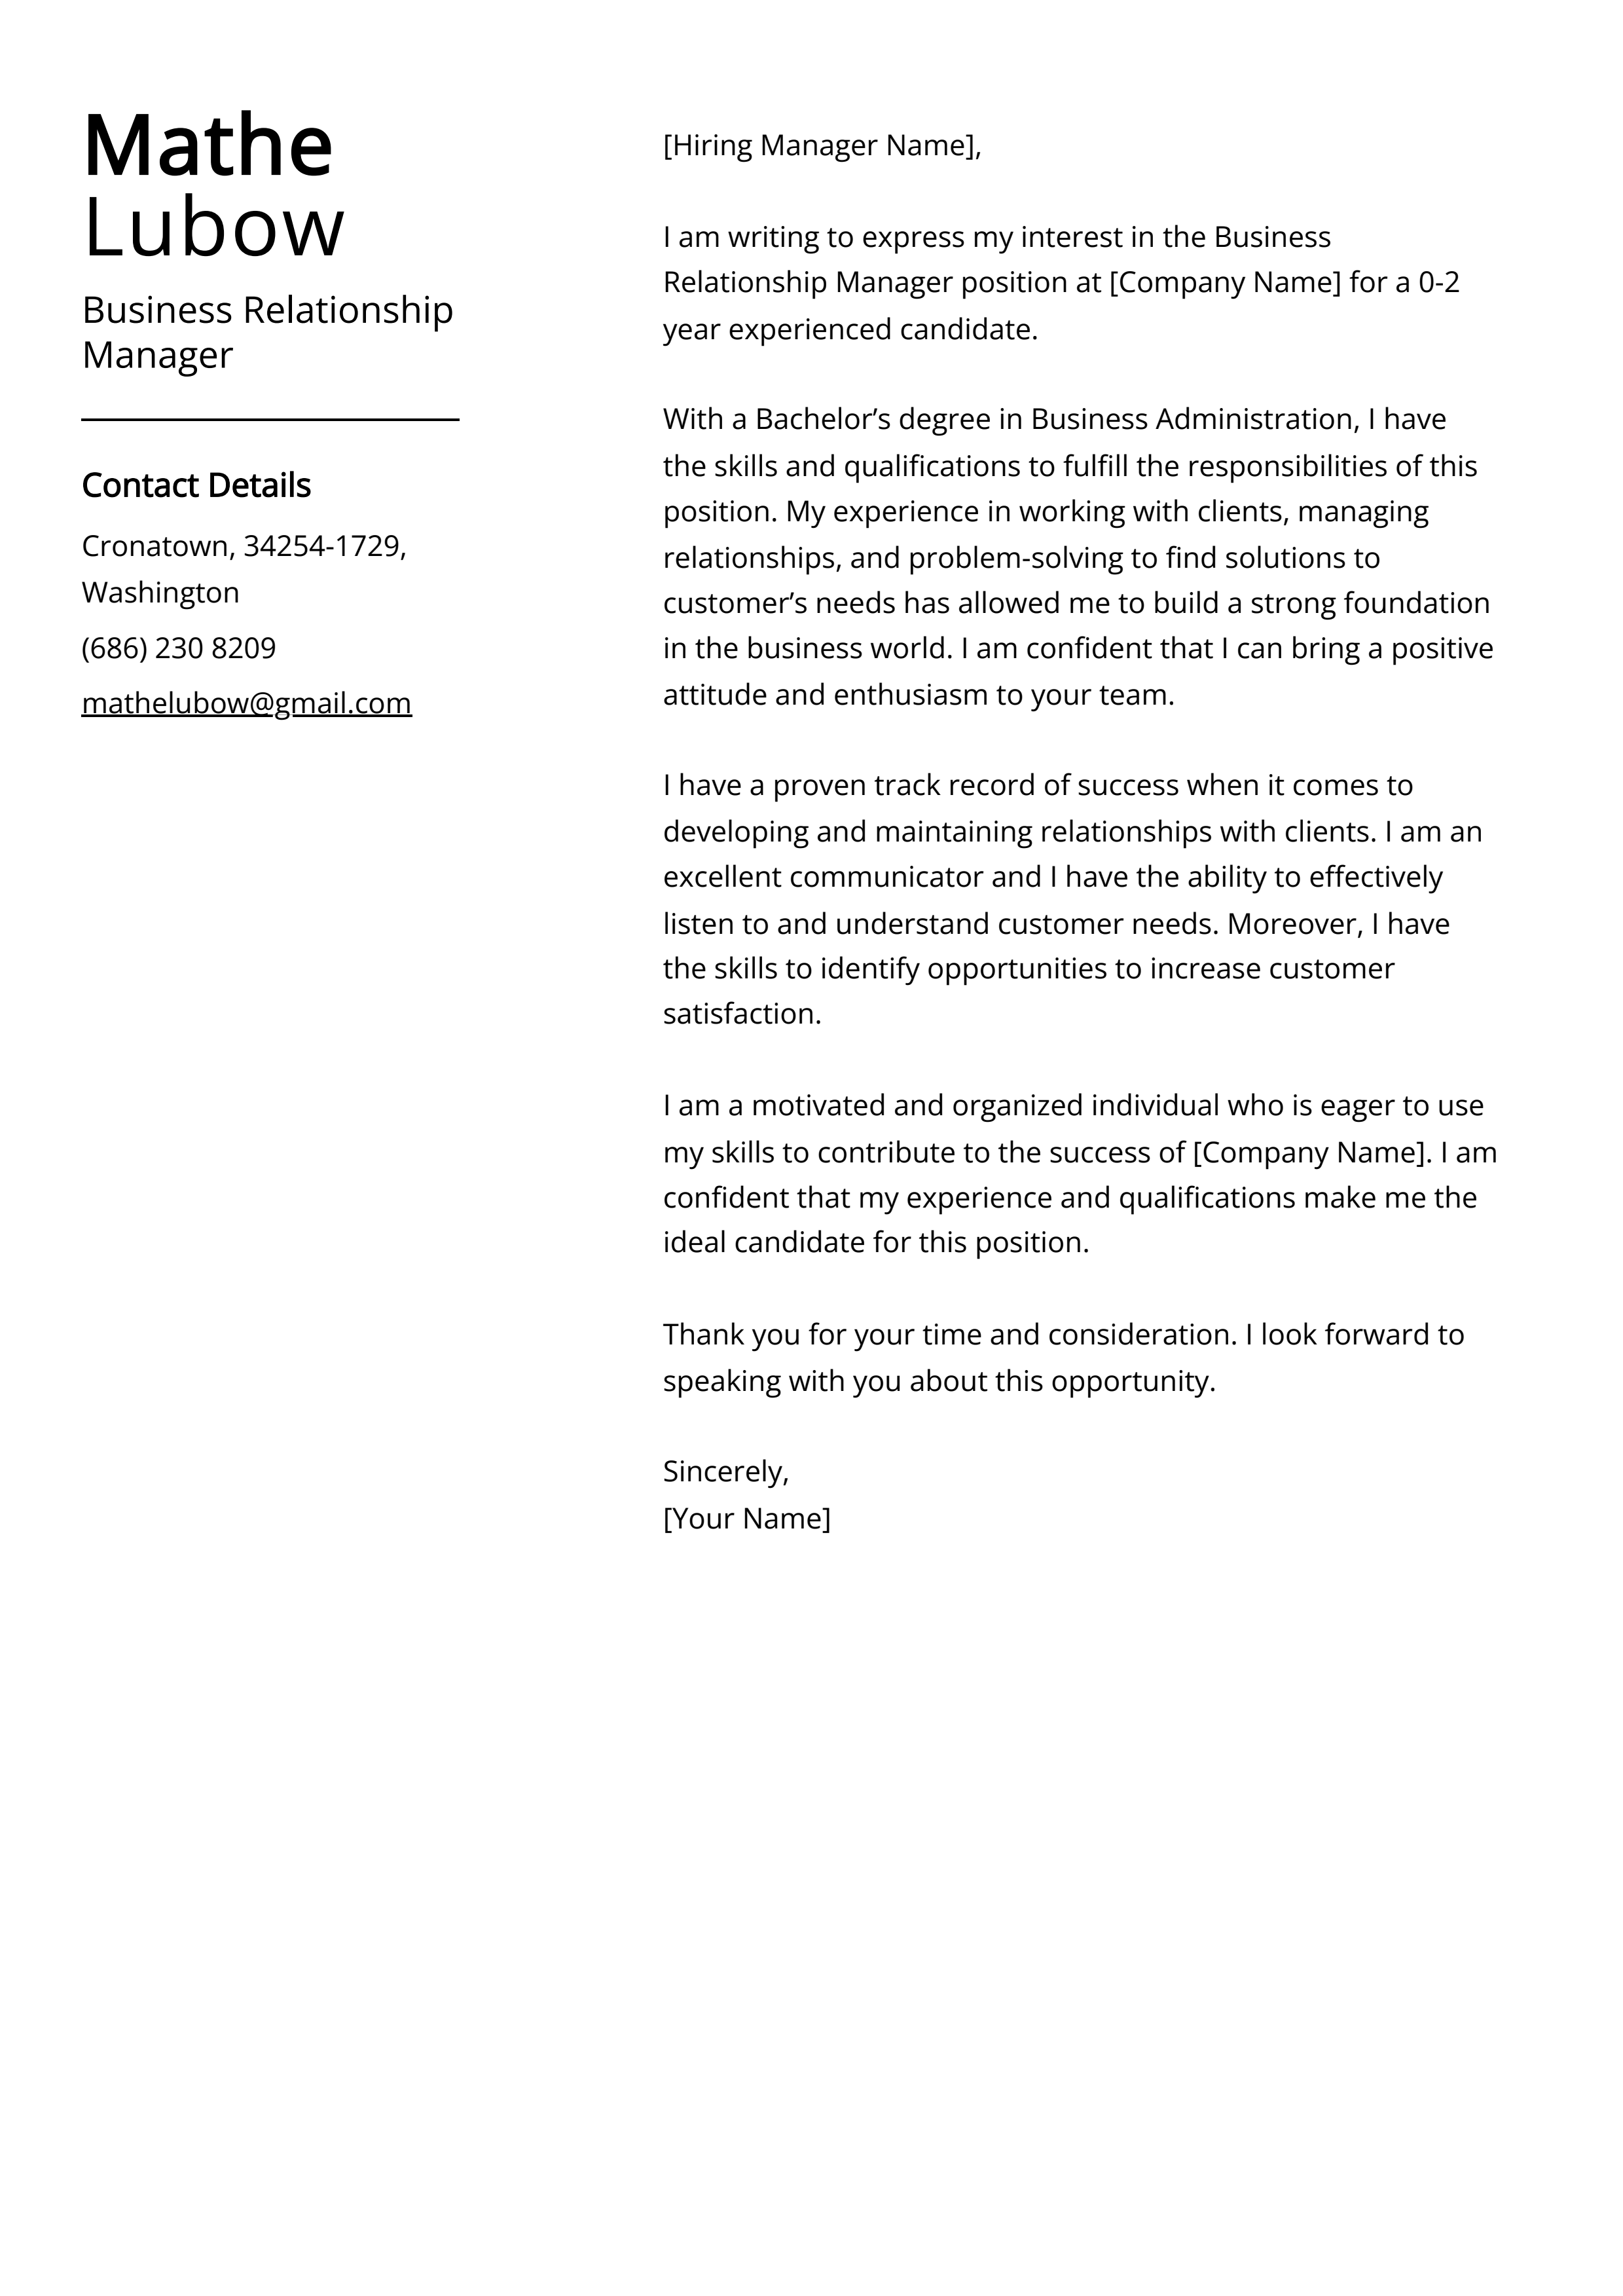 Business Relationship Manager Cover Letter Example